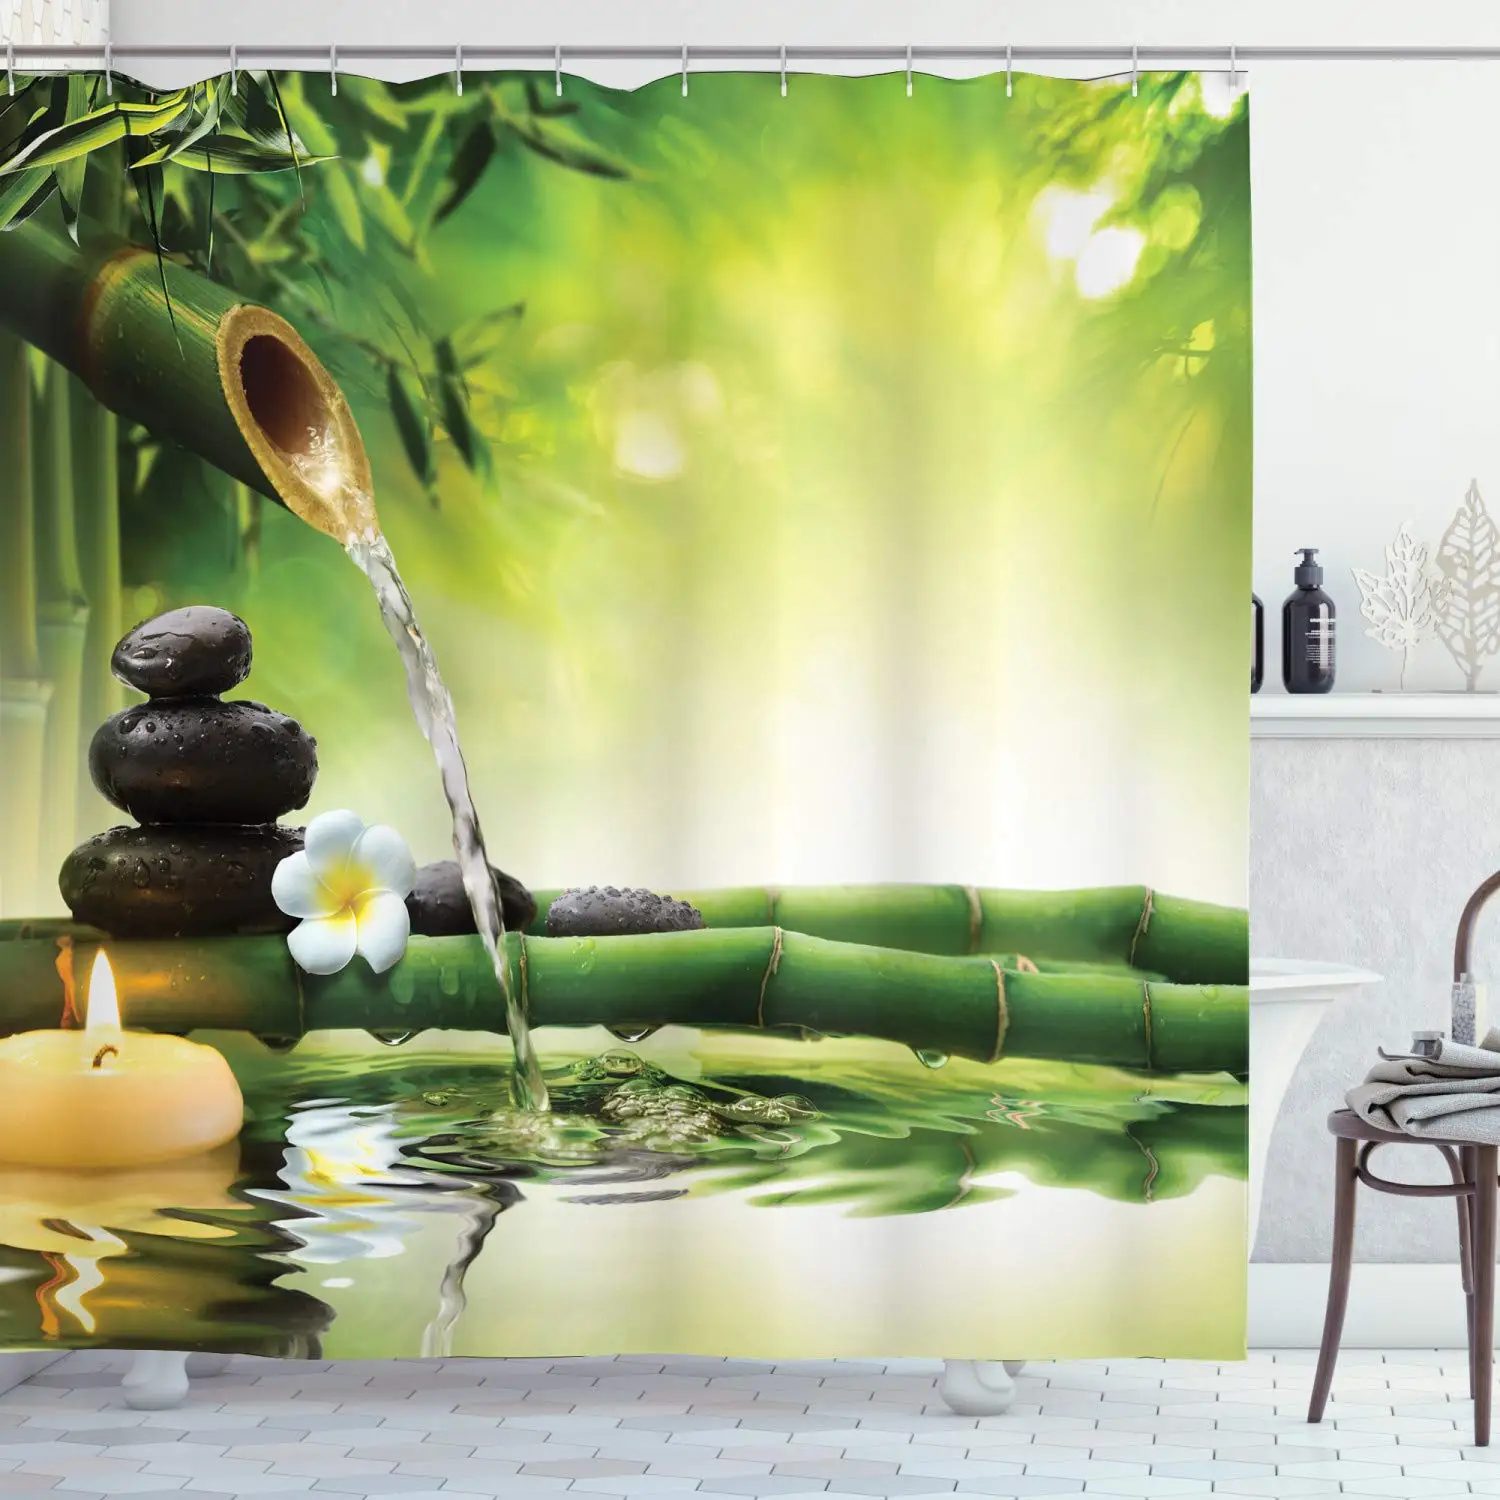 

Spa Shower Curtain, Meditation and Picture of Bamboo Stalks Candle and Basalt Stones Theraphy Relaxing, Cloth Fabric Bathroom